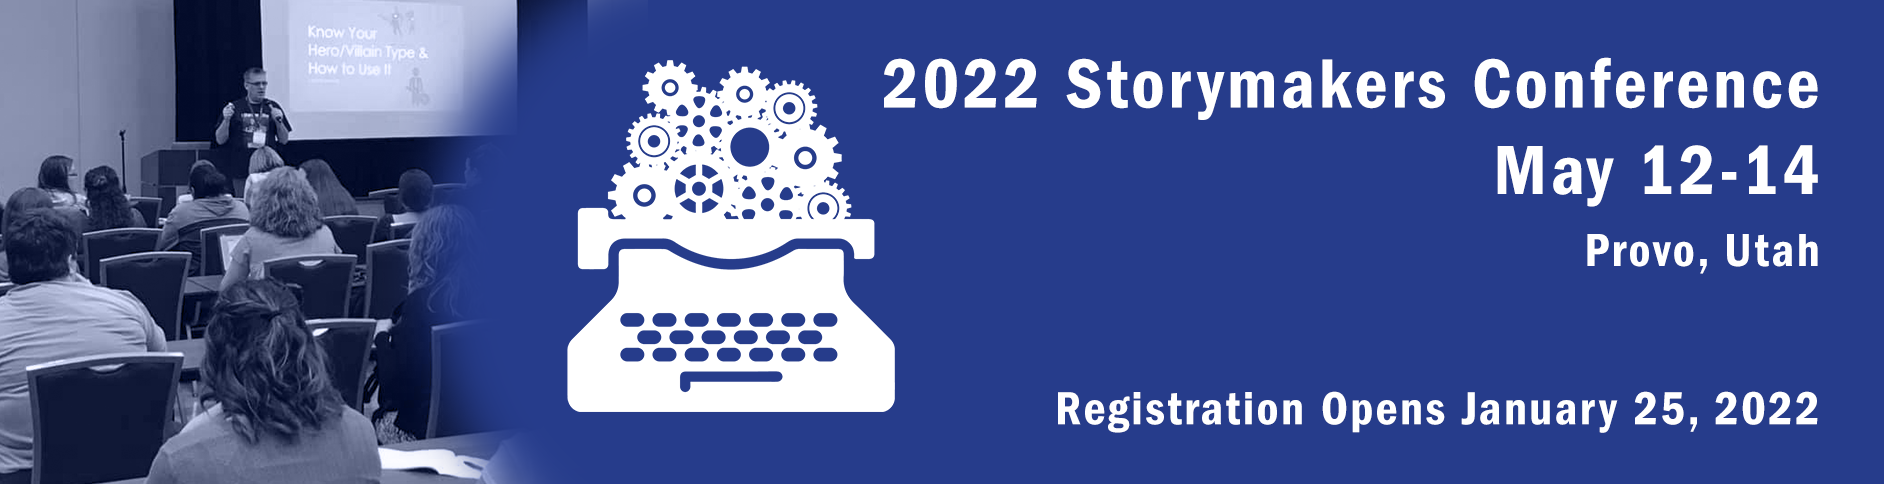 2022 Storymakers Conference May 12-14 Provo, Utah Registration Opens January 25, 2022